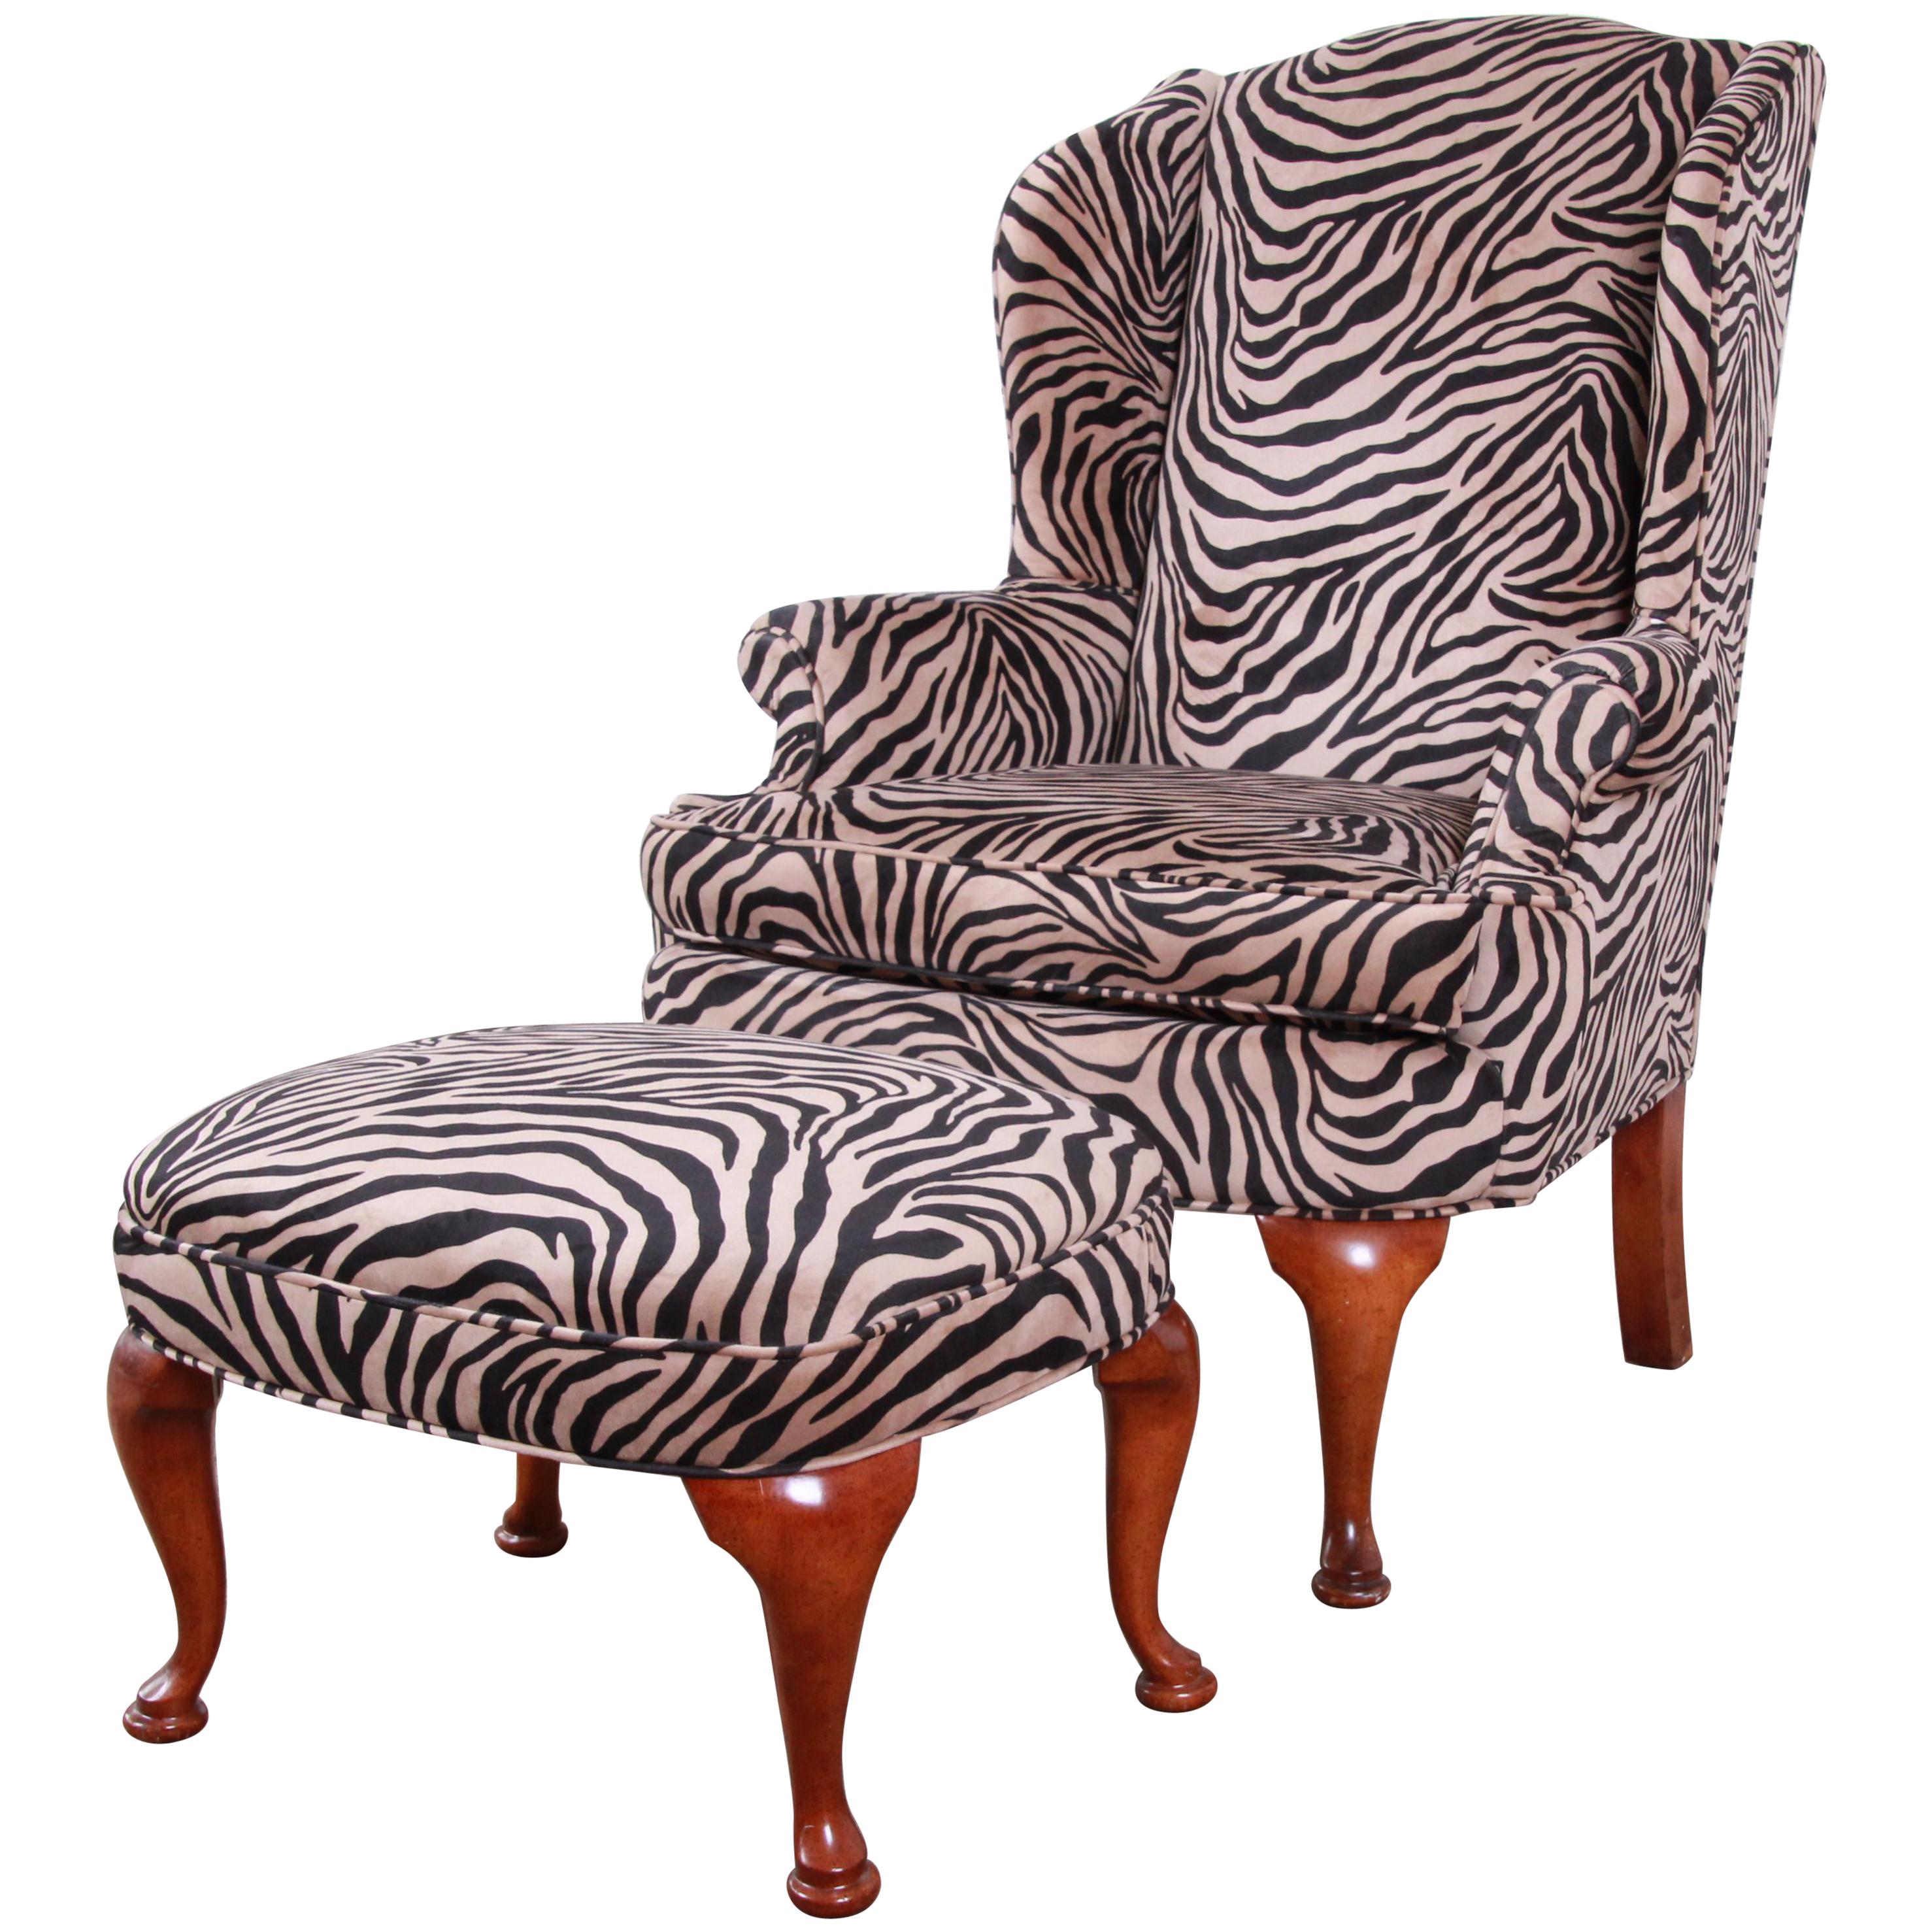 Queen Anne Style Wingback Lounge Chair and Ottoman in Zebra Print Upholstery